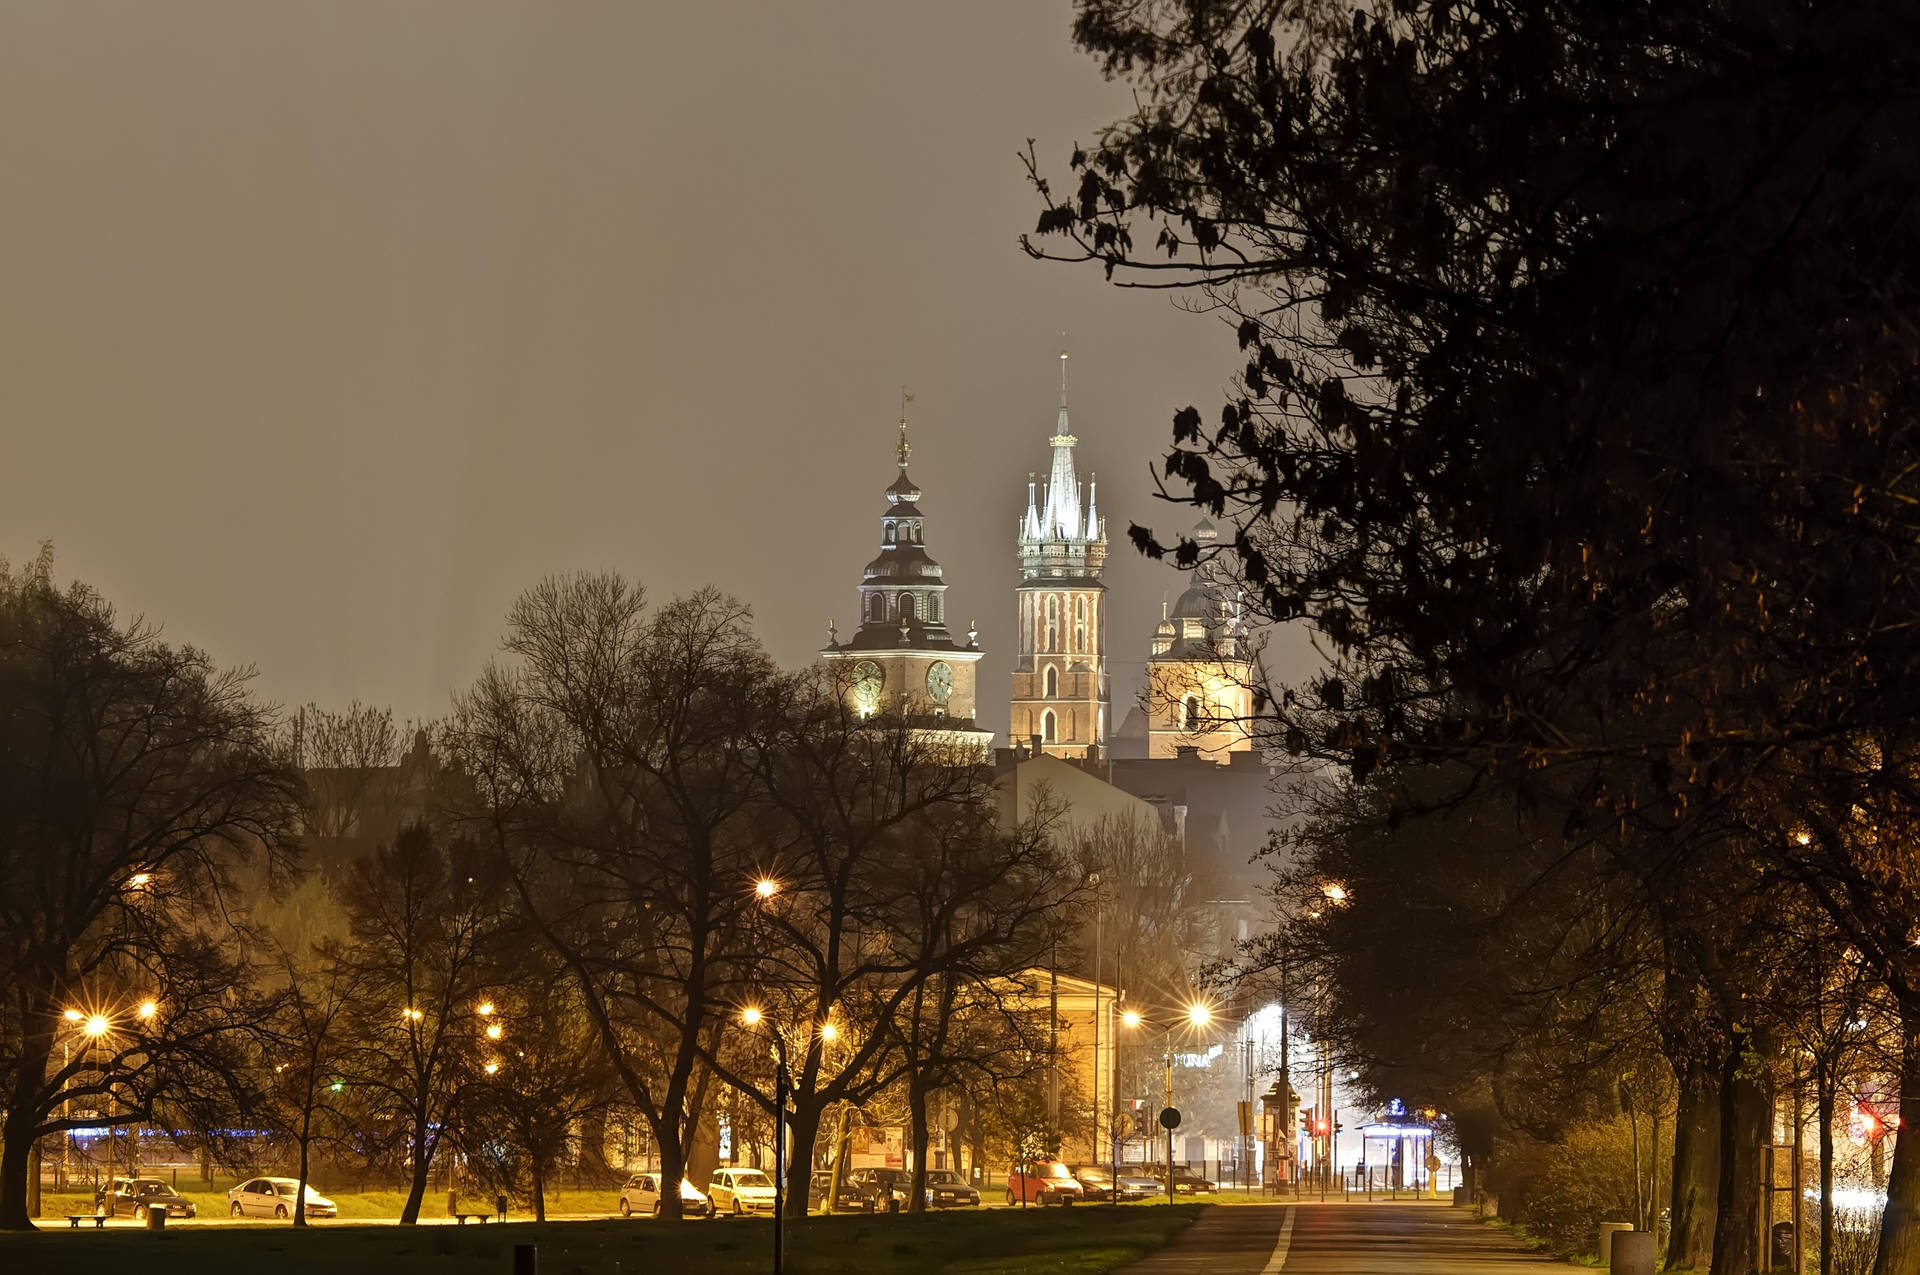 Road Going To St. Mary's Basilica In Krakow Poland Wallpaper